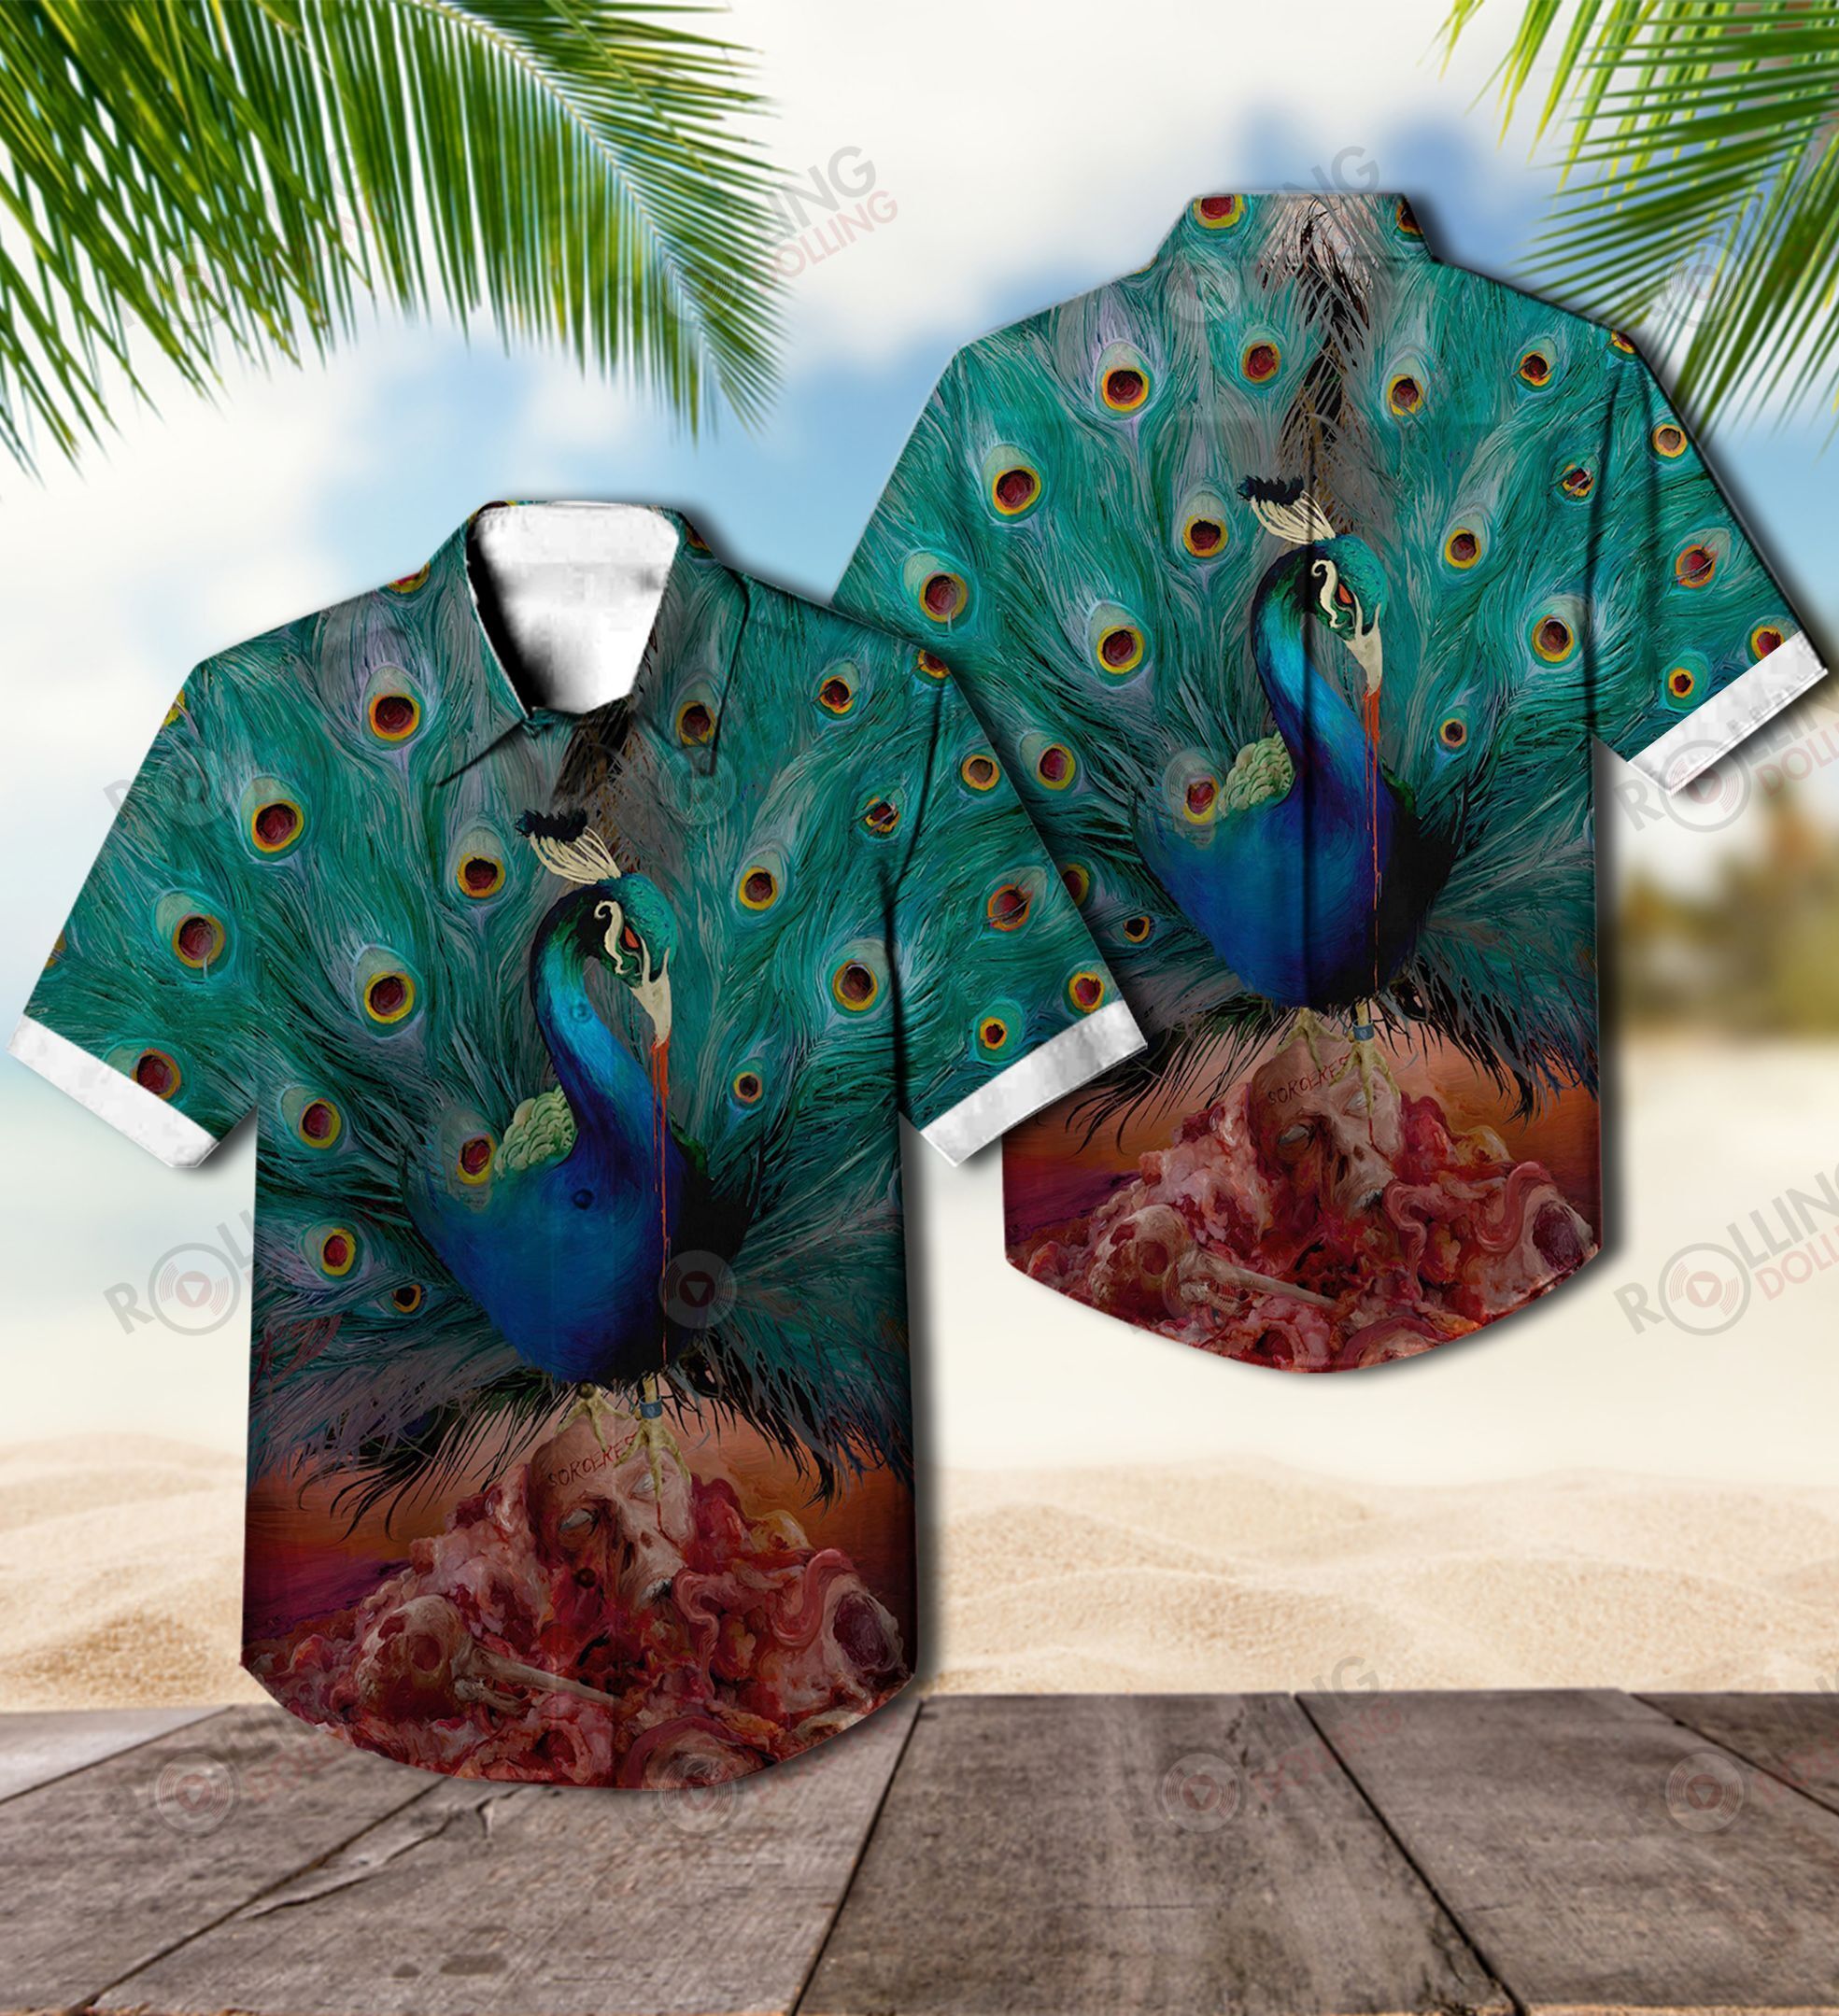 This Hawaiian shirt is an excellent choice if you go on vacation 130